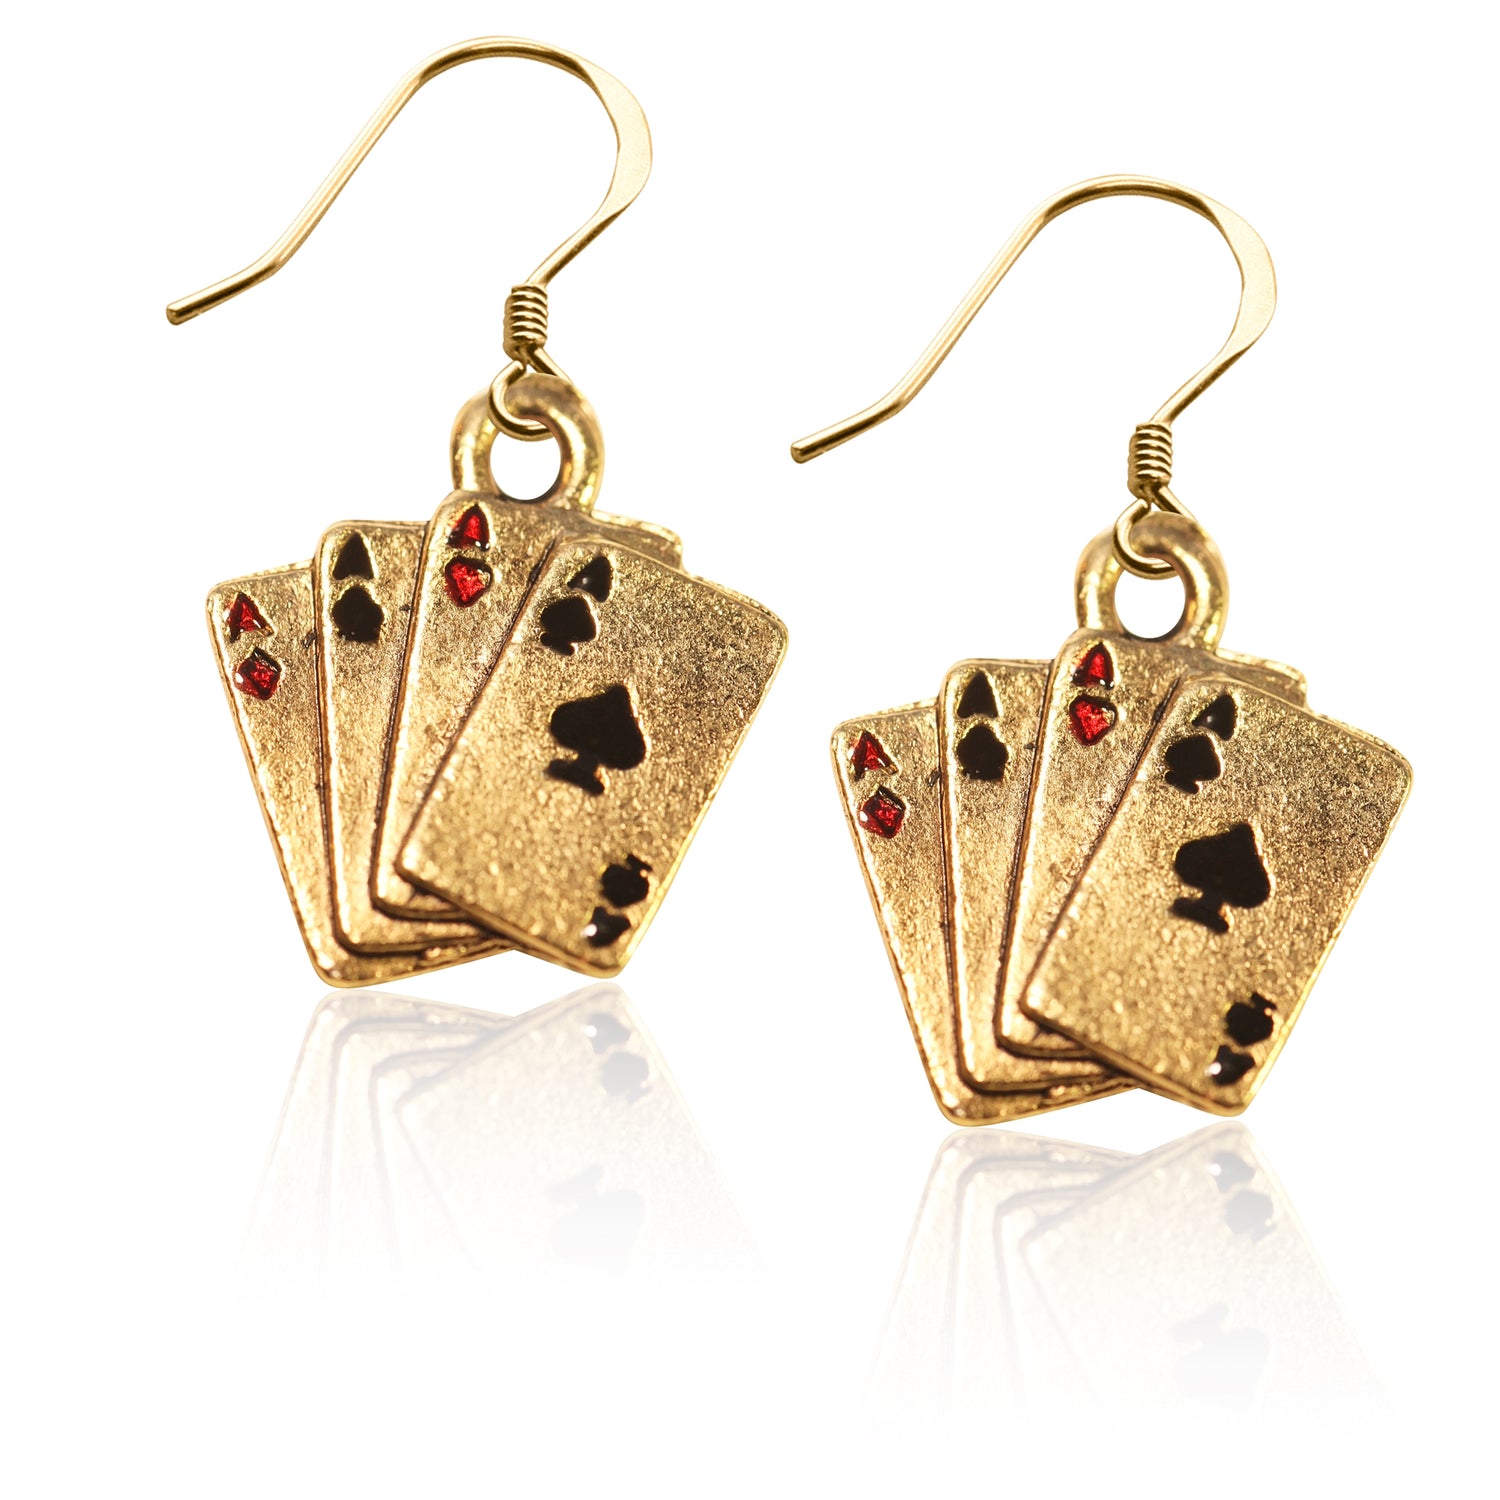 Whimsical Gifts | Aces Charm Earrings in Gold Finish | Hobbies & Special Interests | Casino | Gaming | Game Night | Jewelry